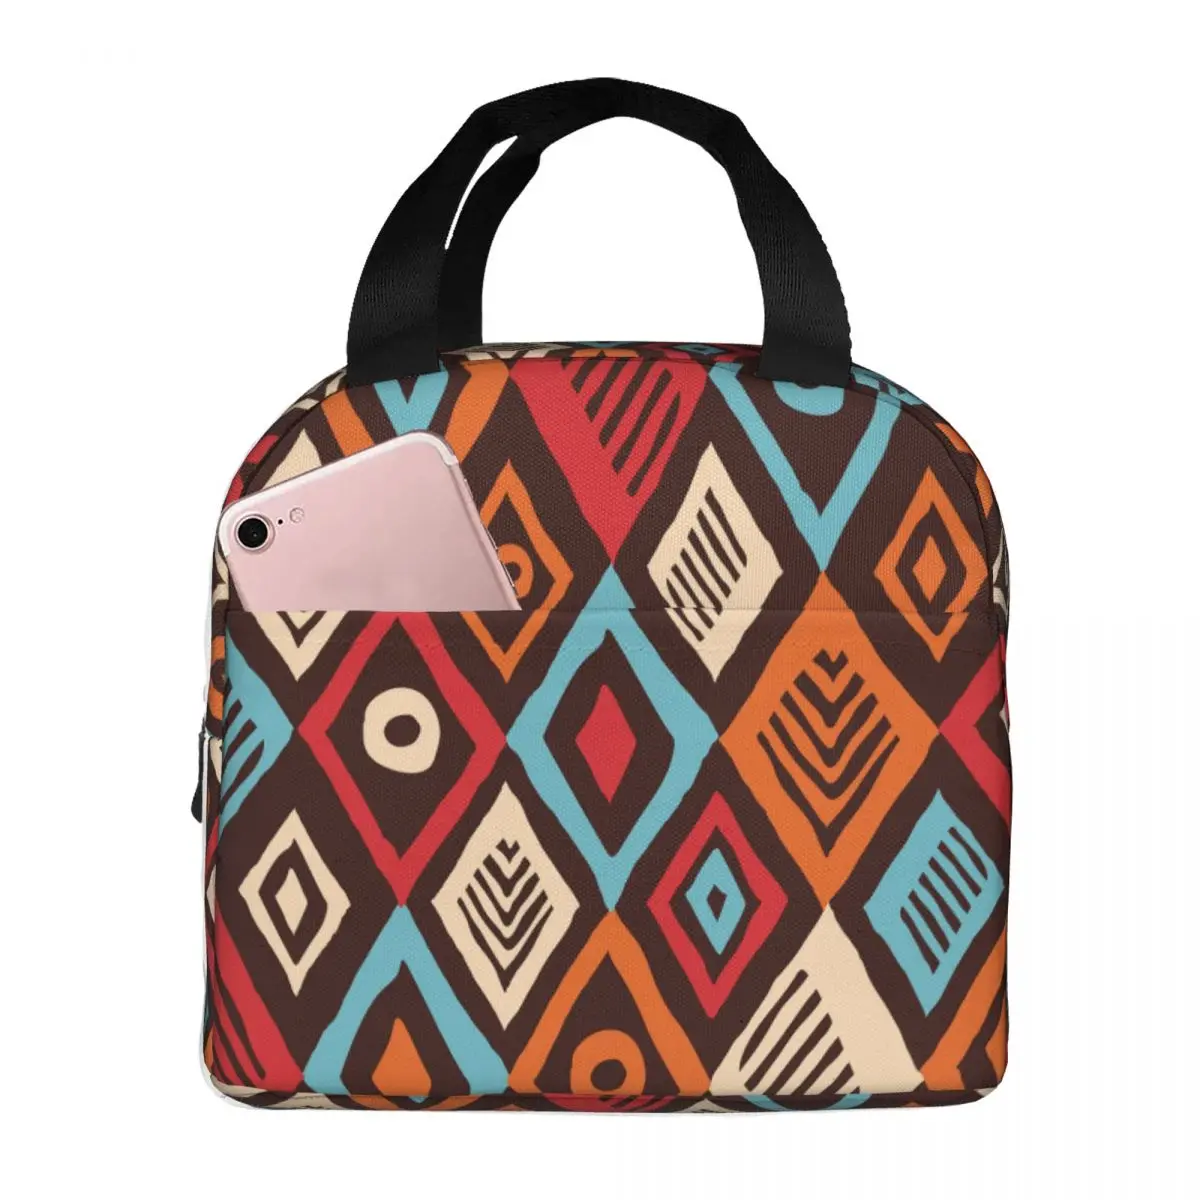 Lunch Bag for Women Kids Abstract Grunge Tribal Insulated Cooler Waterproof Picnic Geometric Boho Style Canvas Tote Food Bag